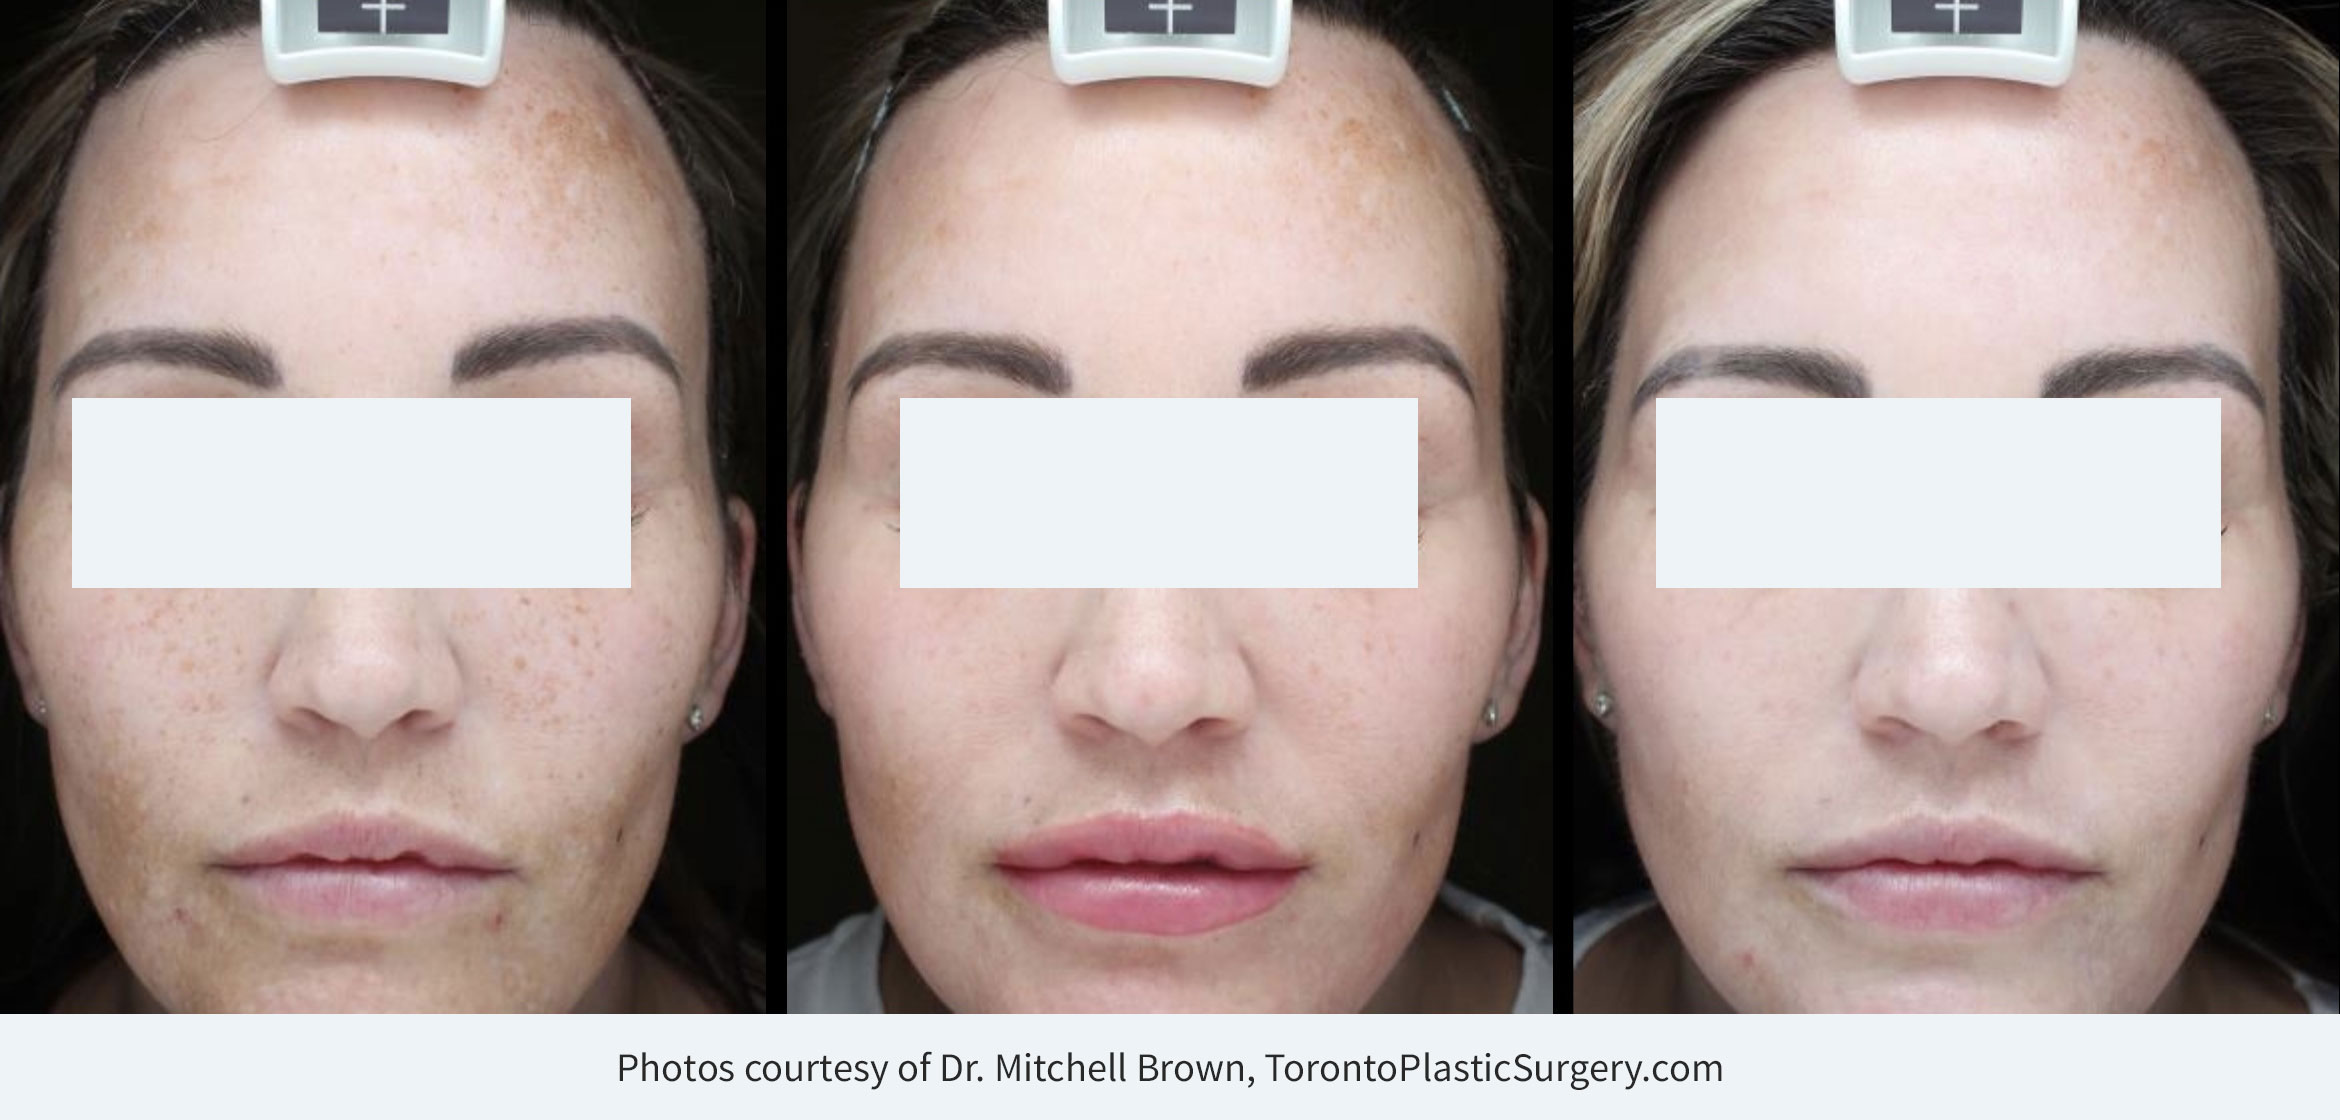 Derm-eclat Melasma and Hyperpigmentation TreatmentBefore/day of treatment start (left), after 2 week touch-up (middle), 1 month post treatment (right).